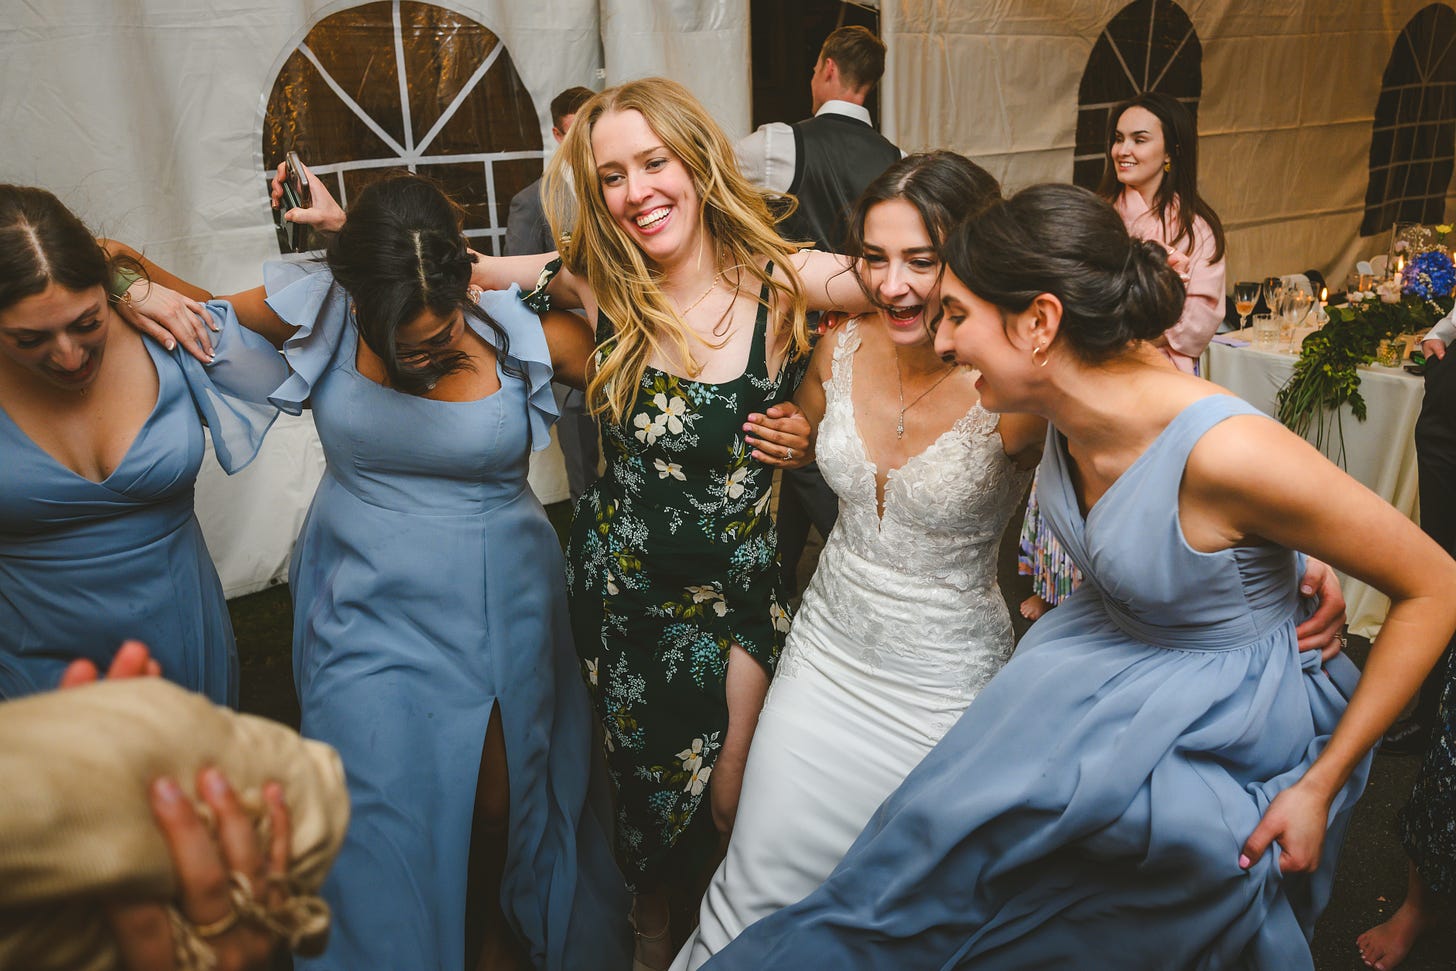 A bride, some bridesmaids, and some guests dancing arm-in-arm